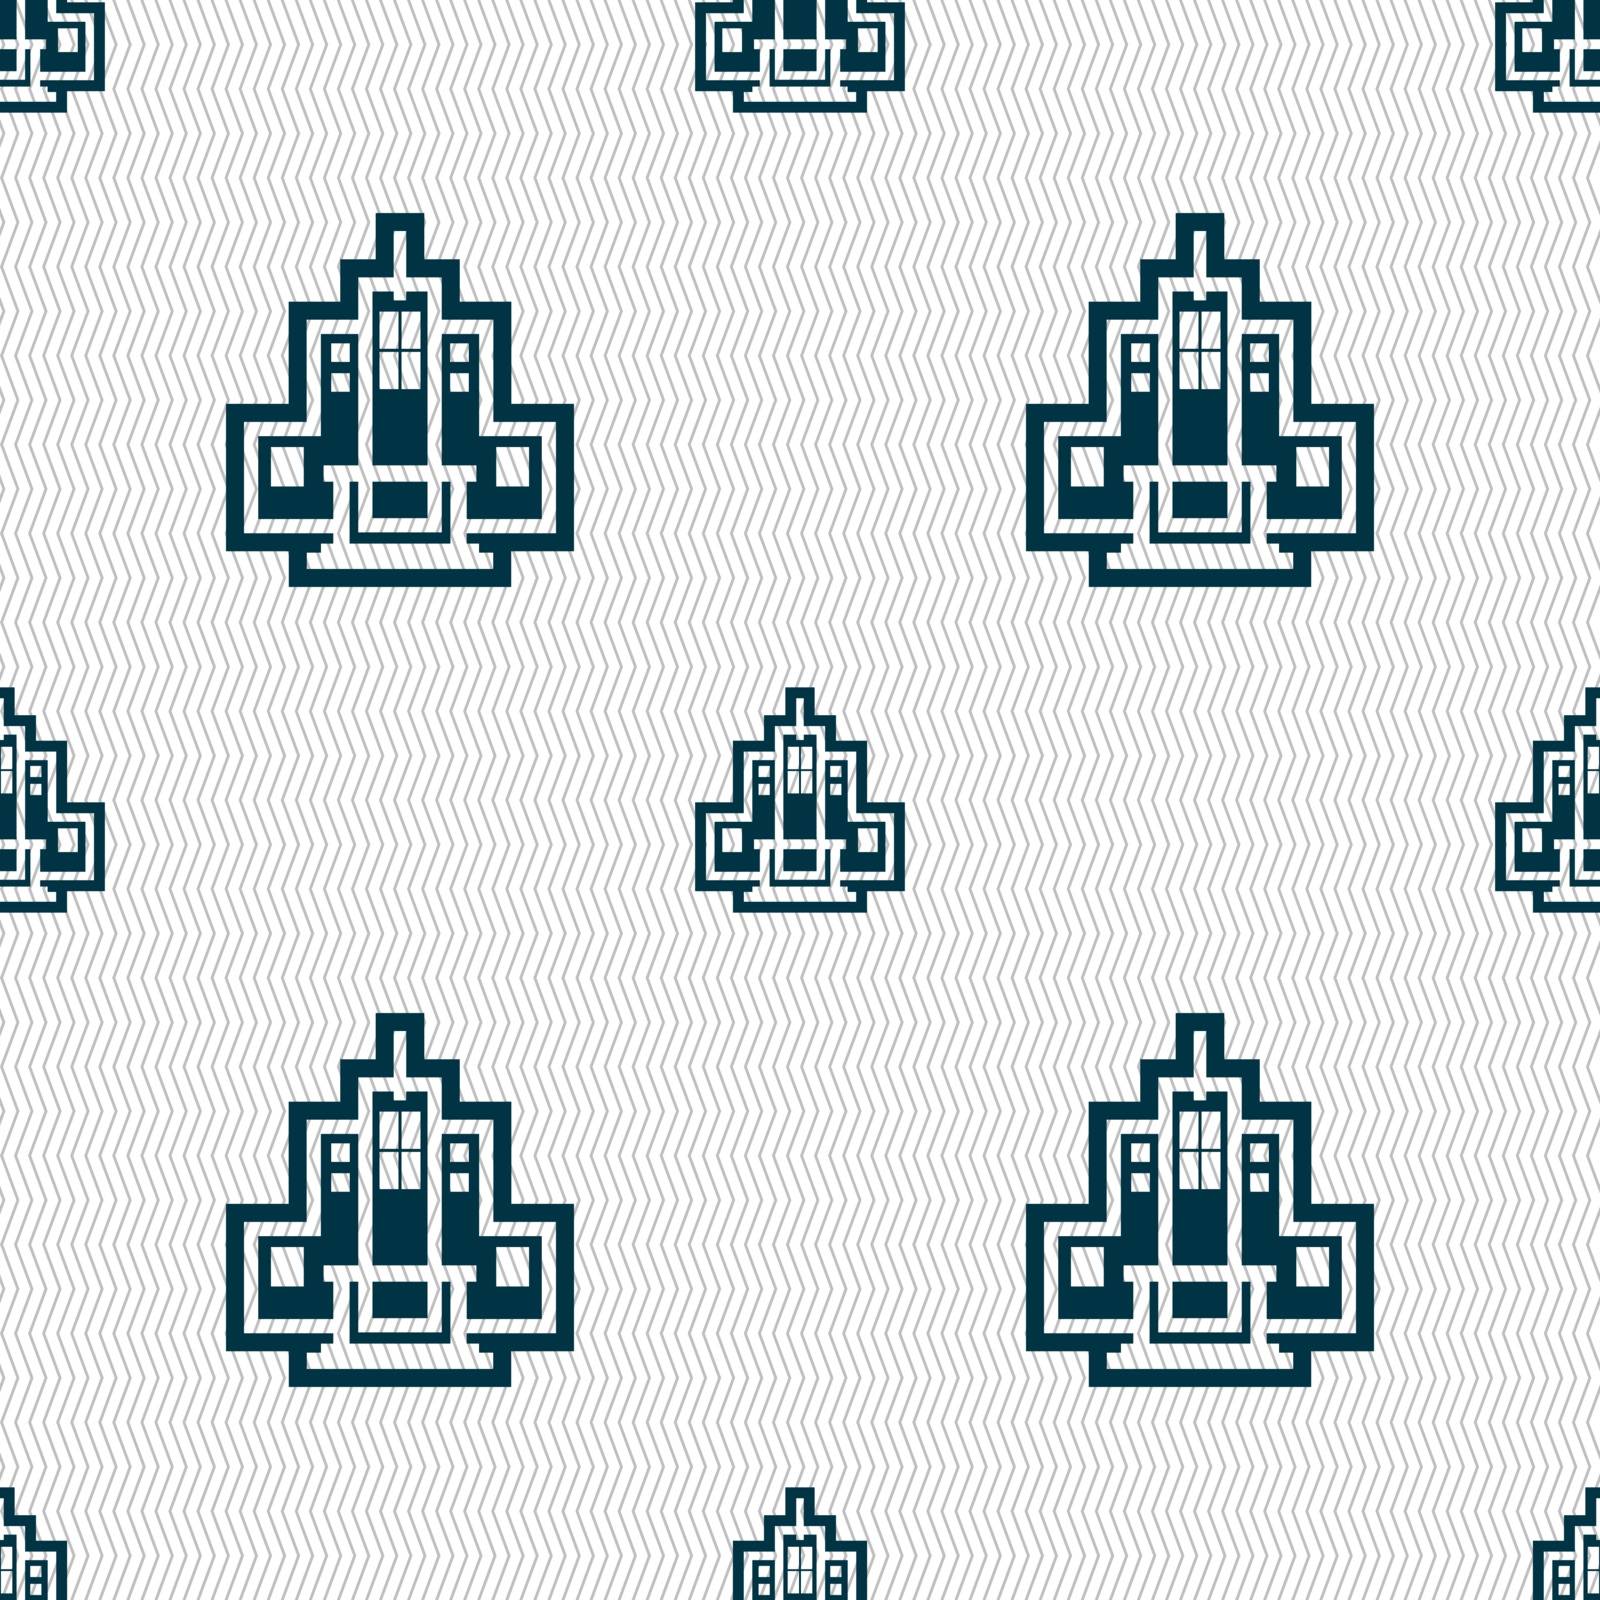 skyscraper icon sign. Seamless pattern with geometric texture. Vector illustration